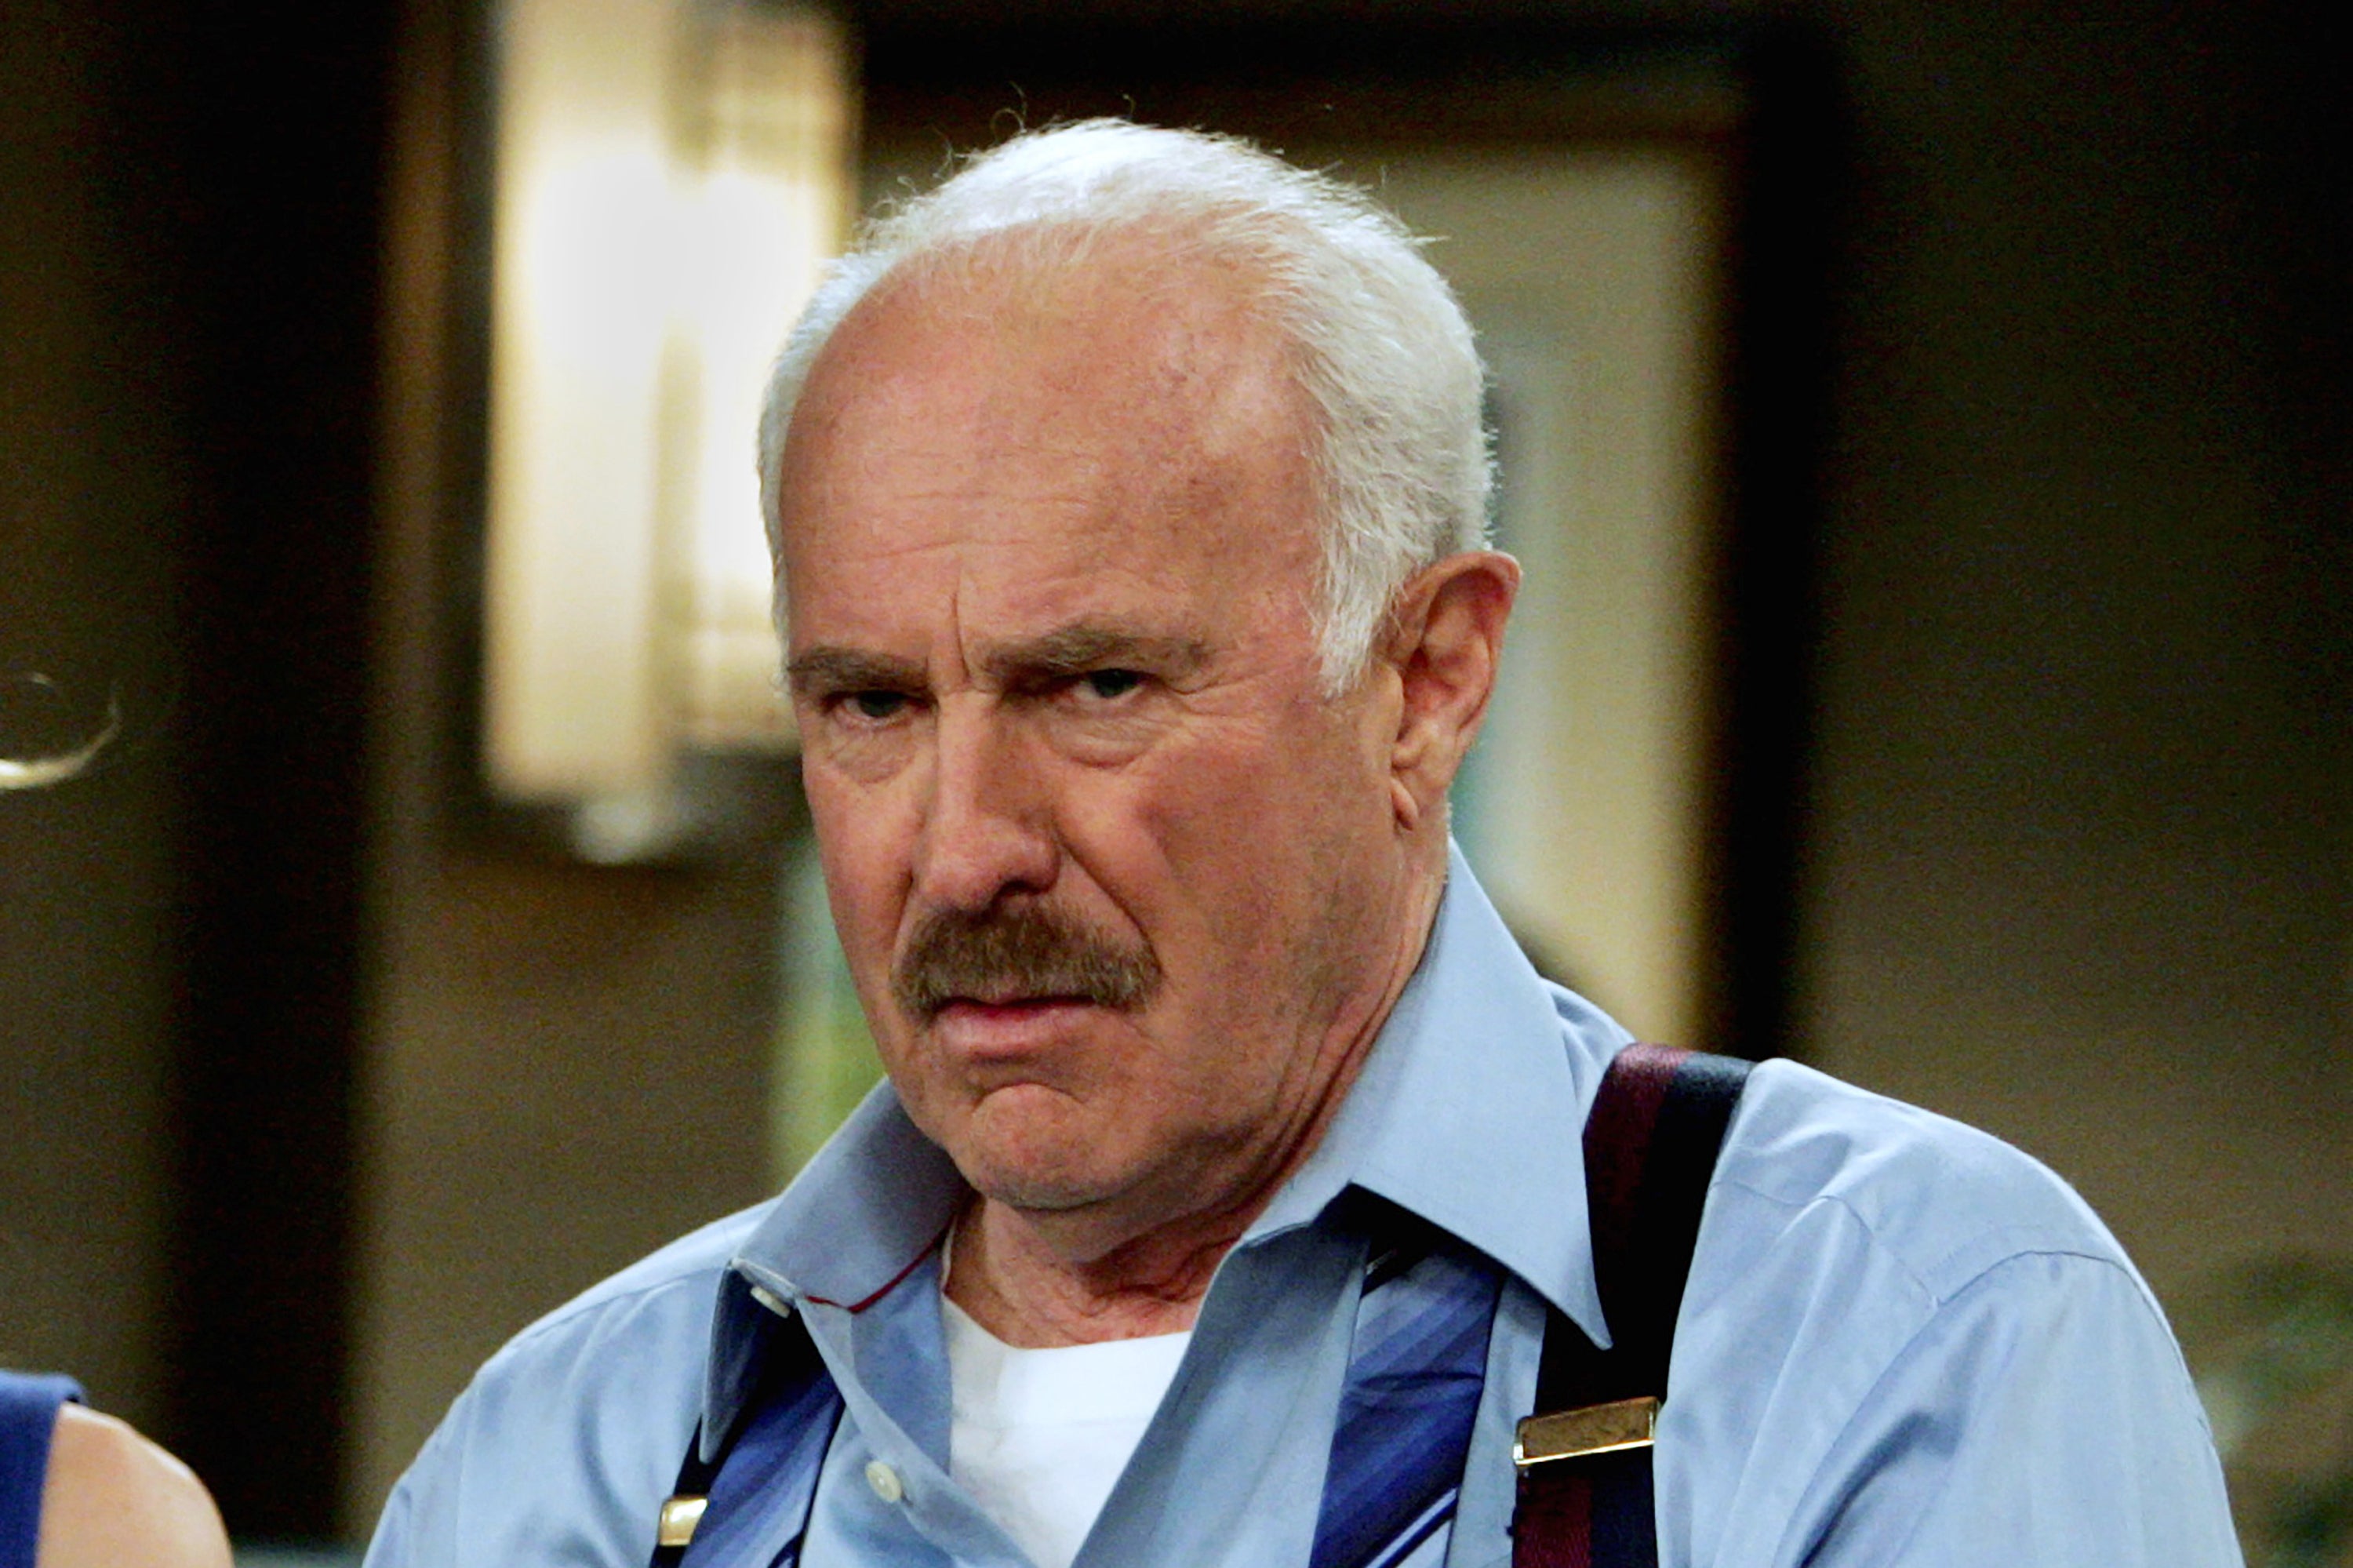 Dabney Coleman on the set of ‘Courting Alex’ in 2006